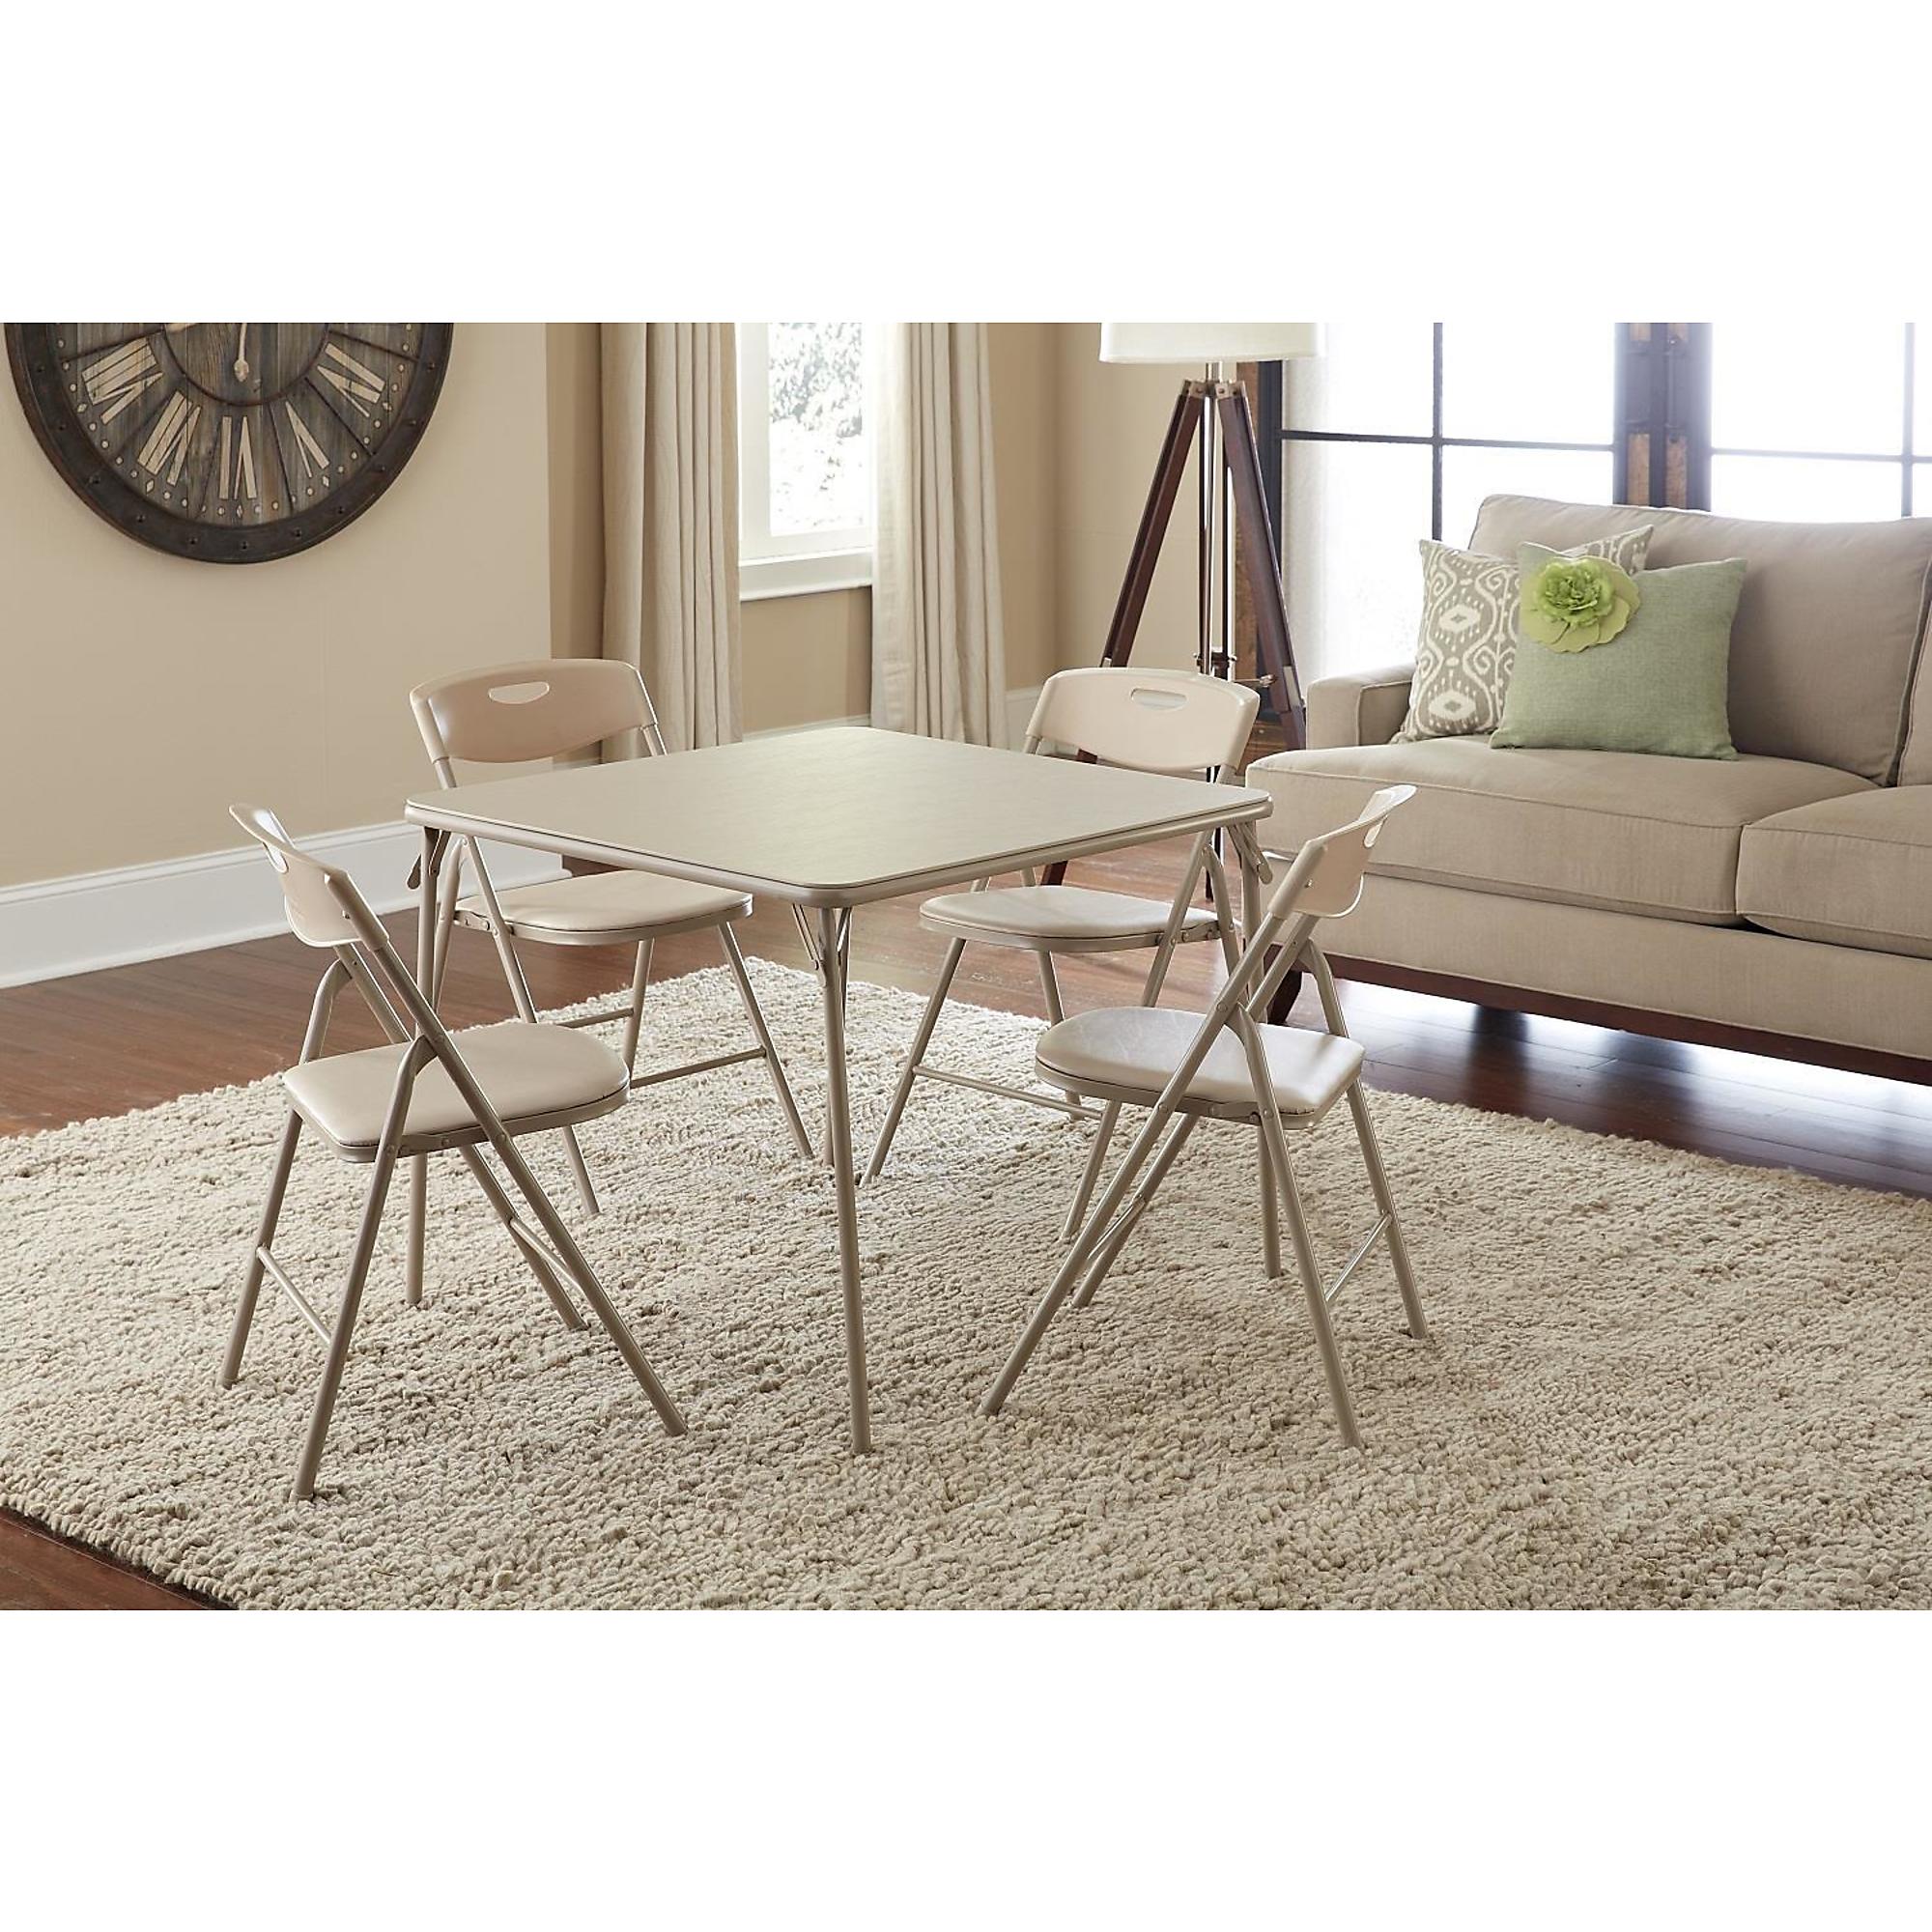 Cosco, 5-Pc Folding Set w/ Card Table 4 Padded Chairs, Height 27.87 in, Width 33.82 in, Length 33.82 in, Model 37557ANTE